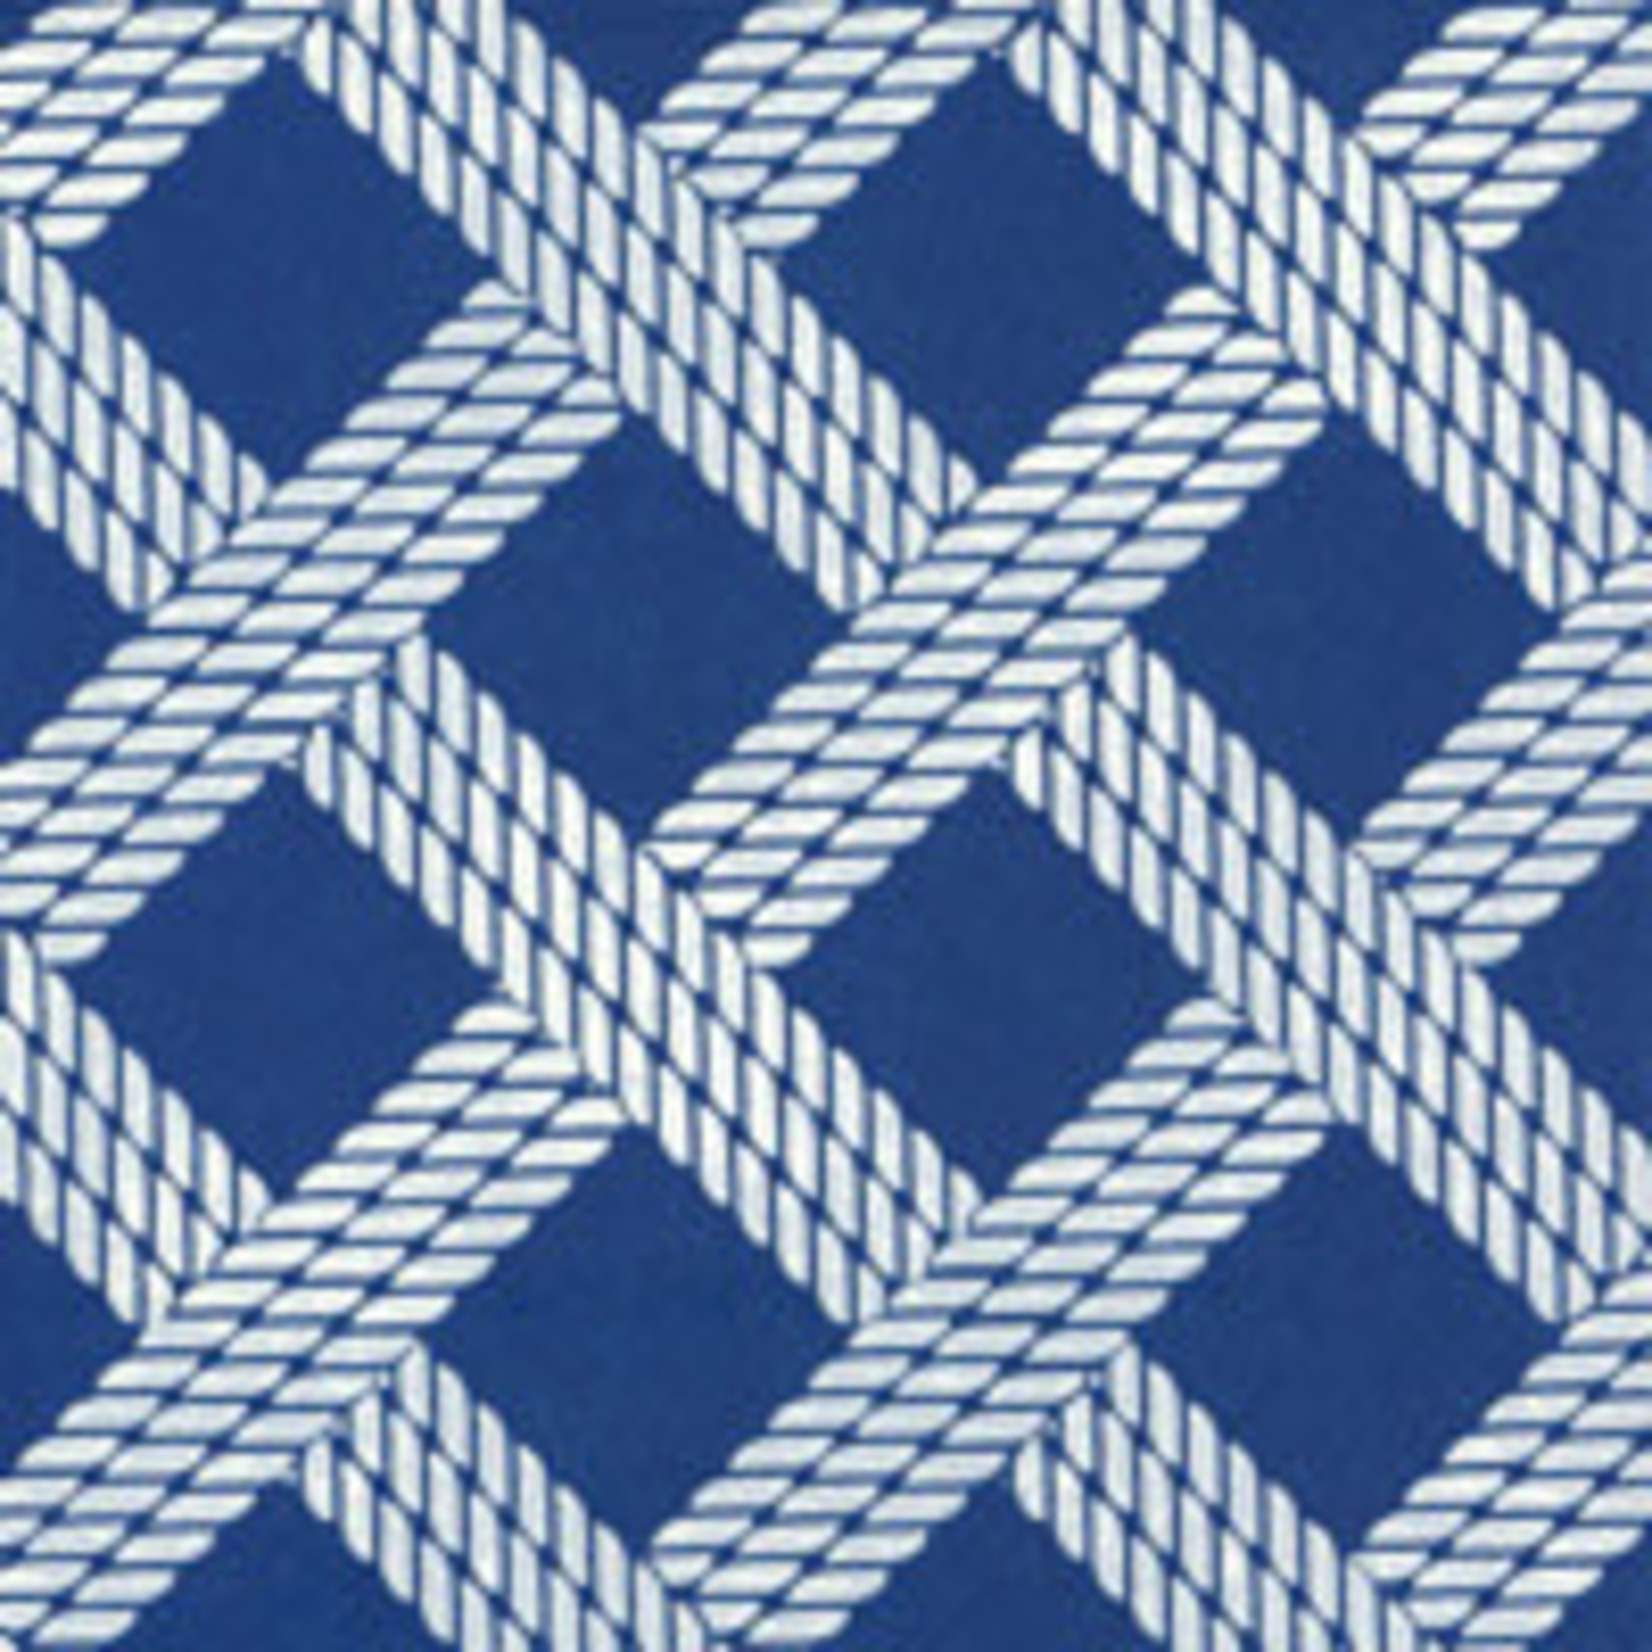 Sailor's Rope Blue Lunch Napkin